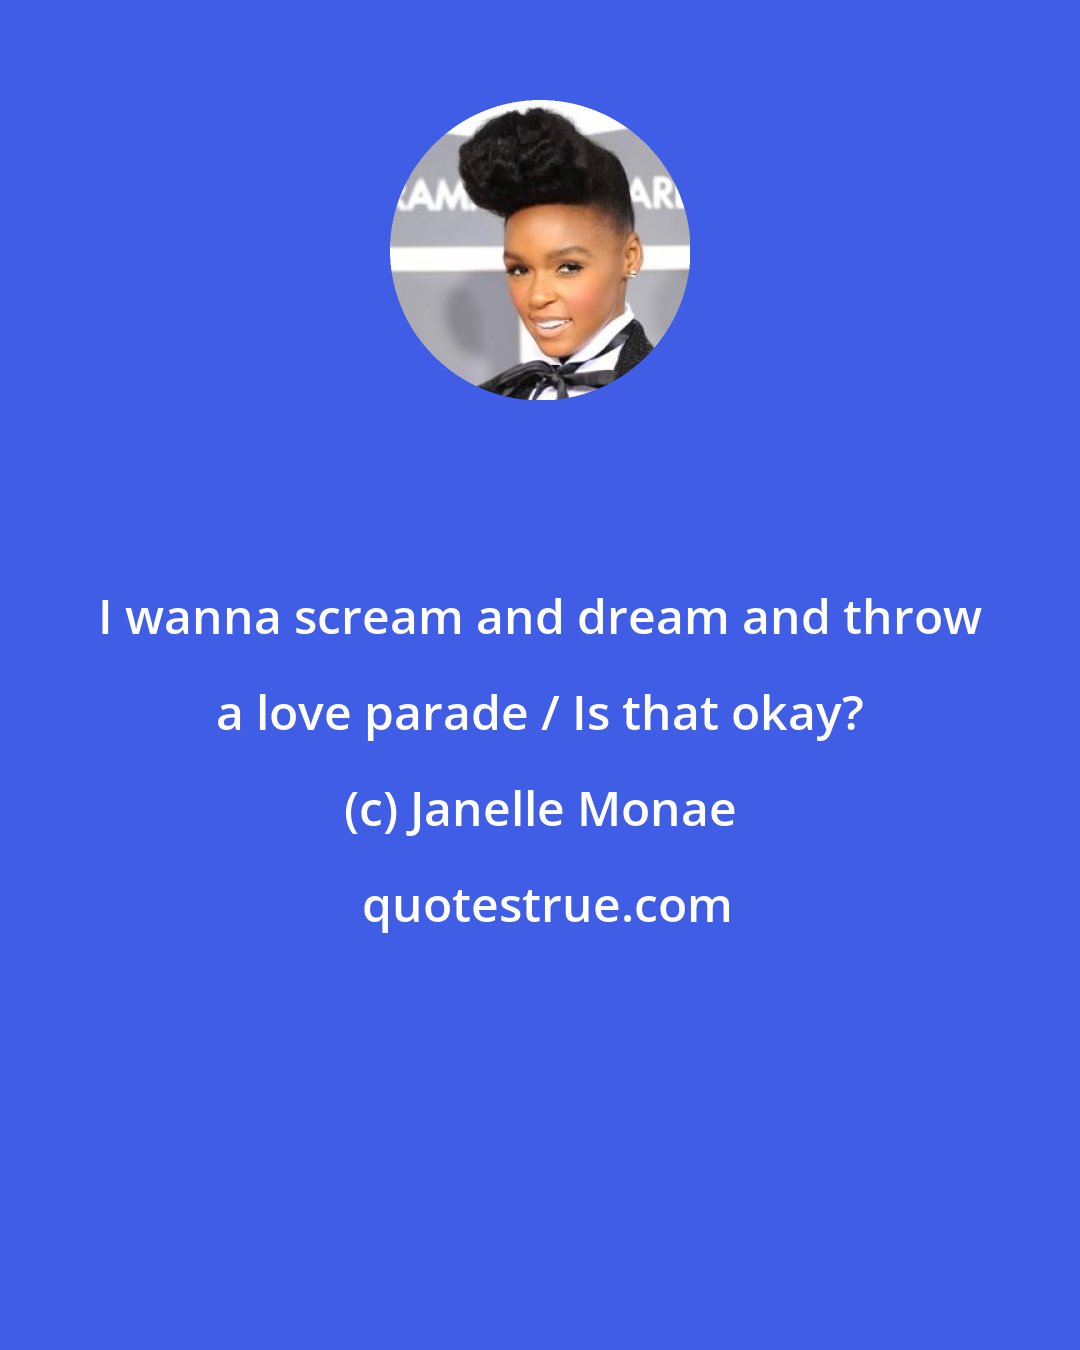 Janelle Monae: I wanna scream and dream and throw a love parade / Is that okay?